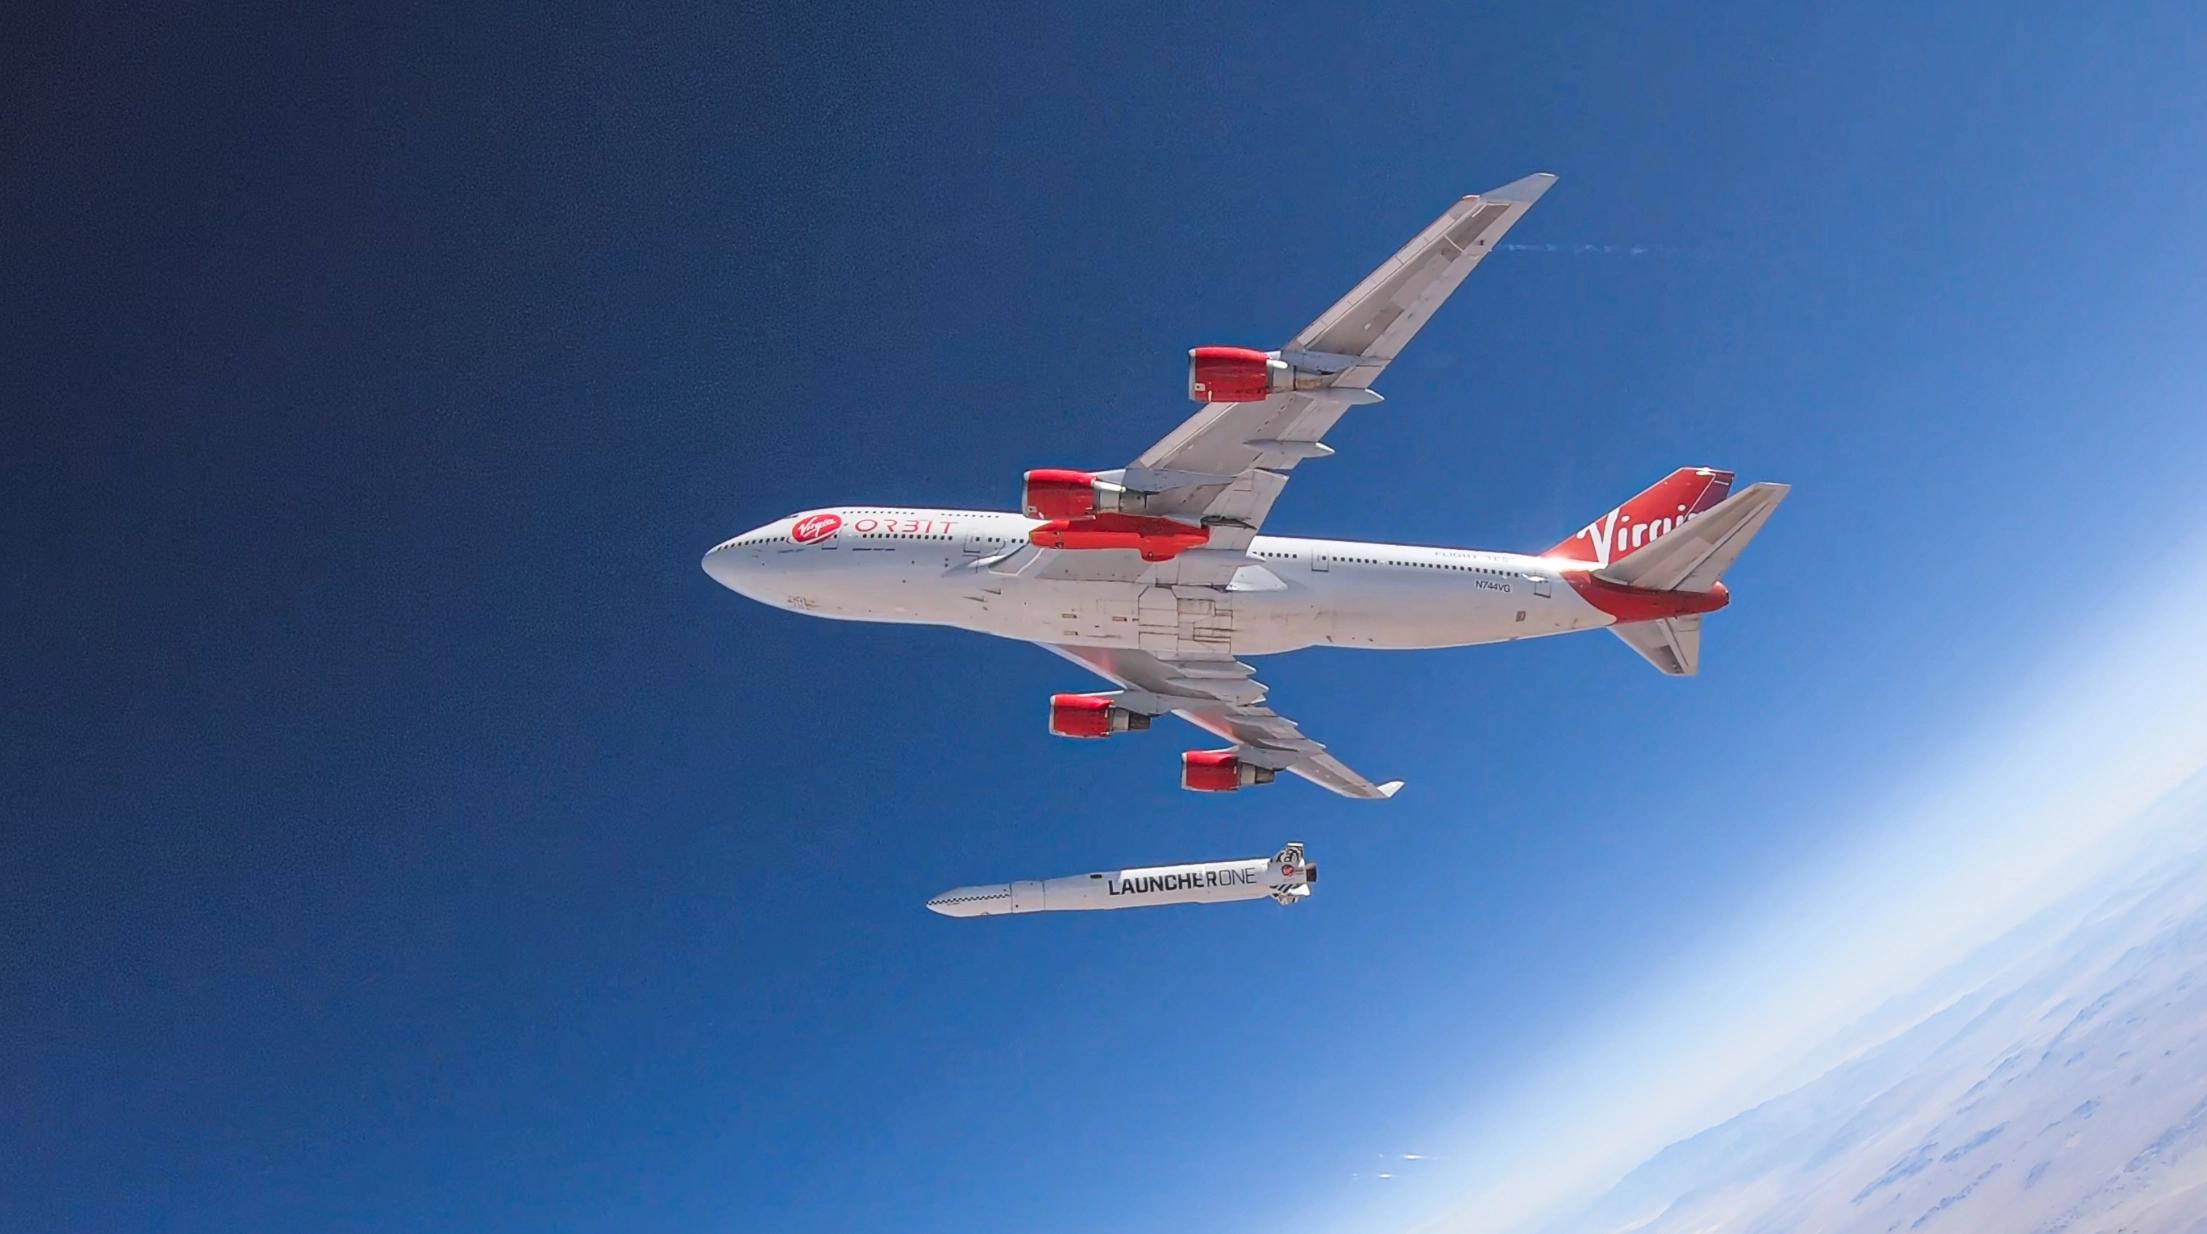 Virgin Orbit's "Cosmic Girl" aircraft shortly after separating the LauncherOne vehicle during a drop-test in July 2019.